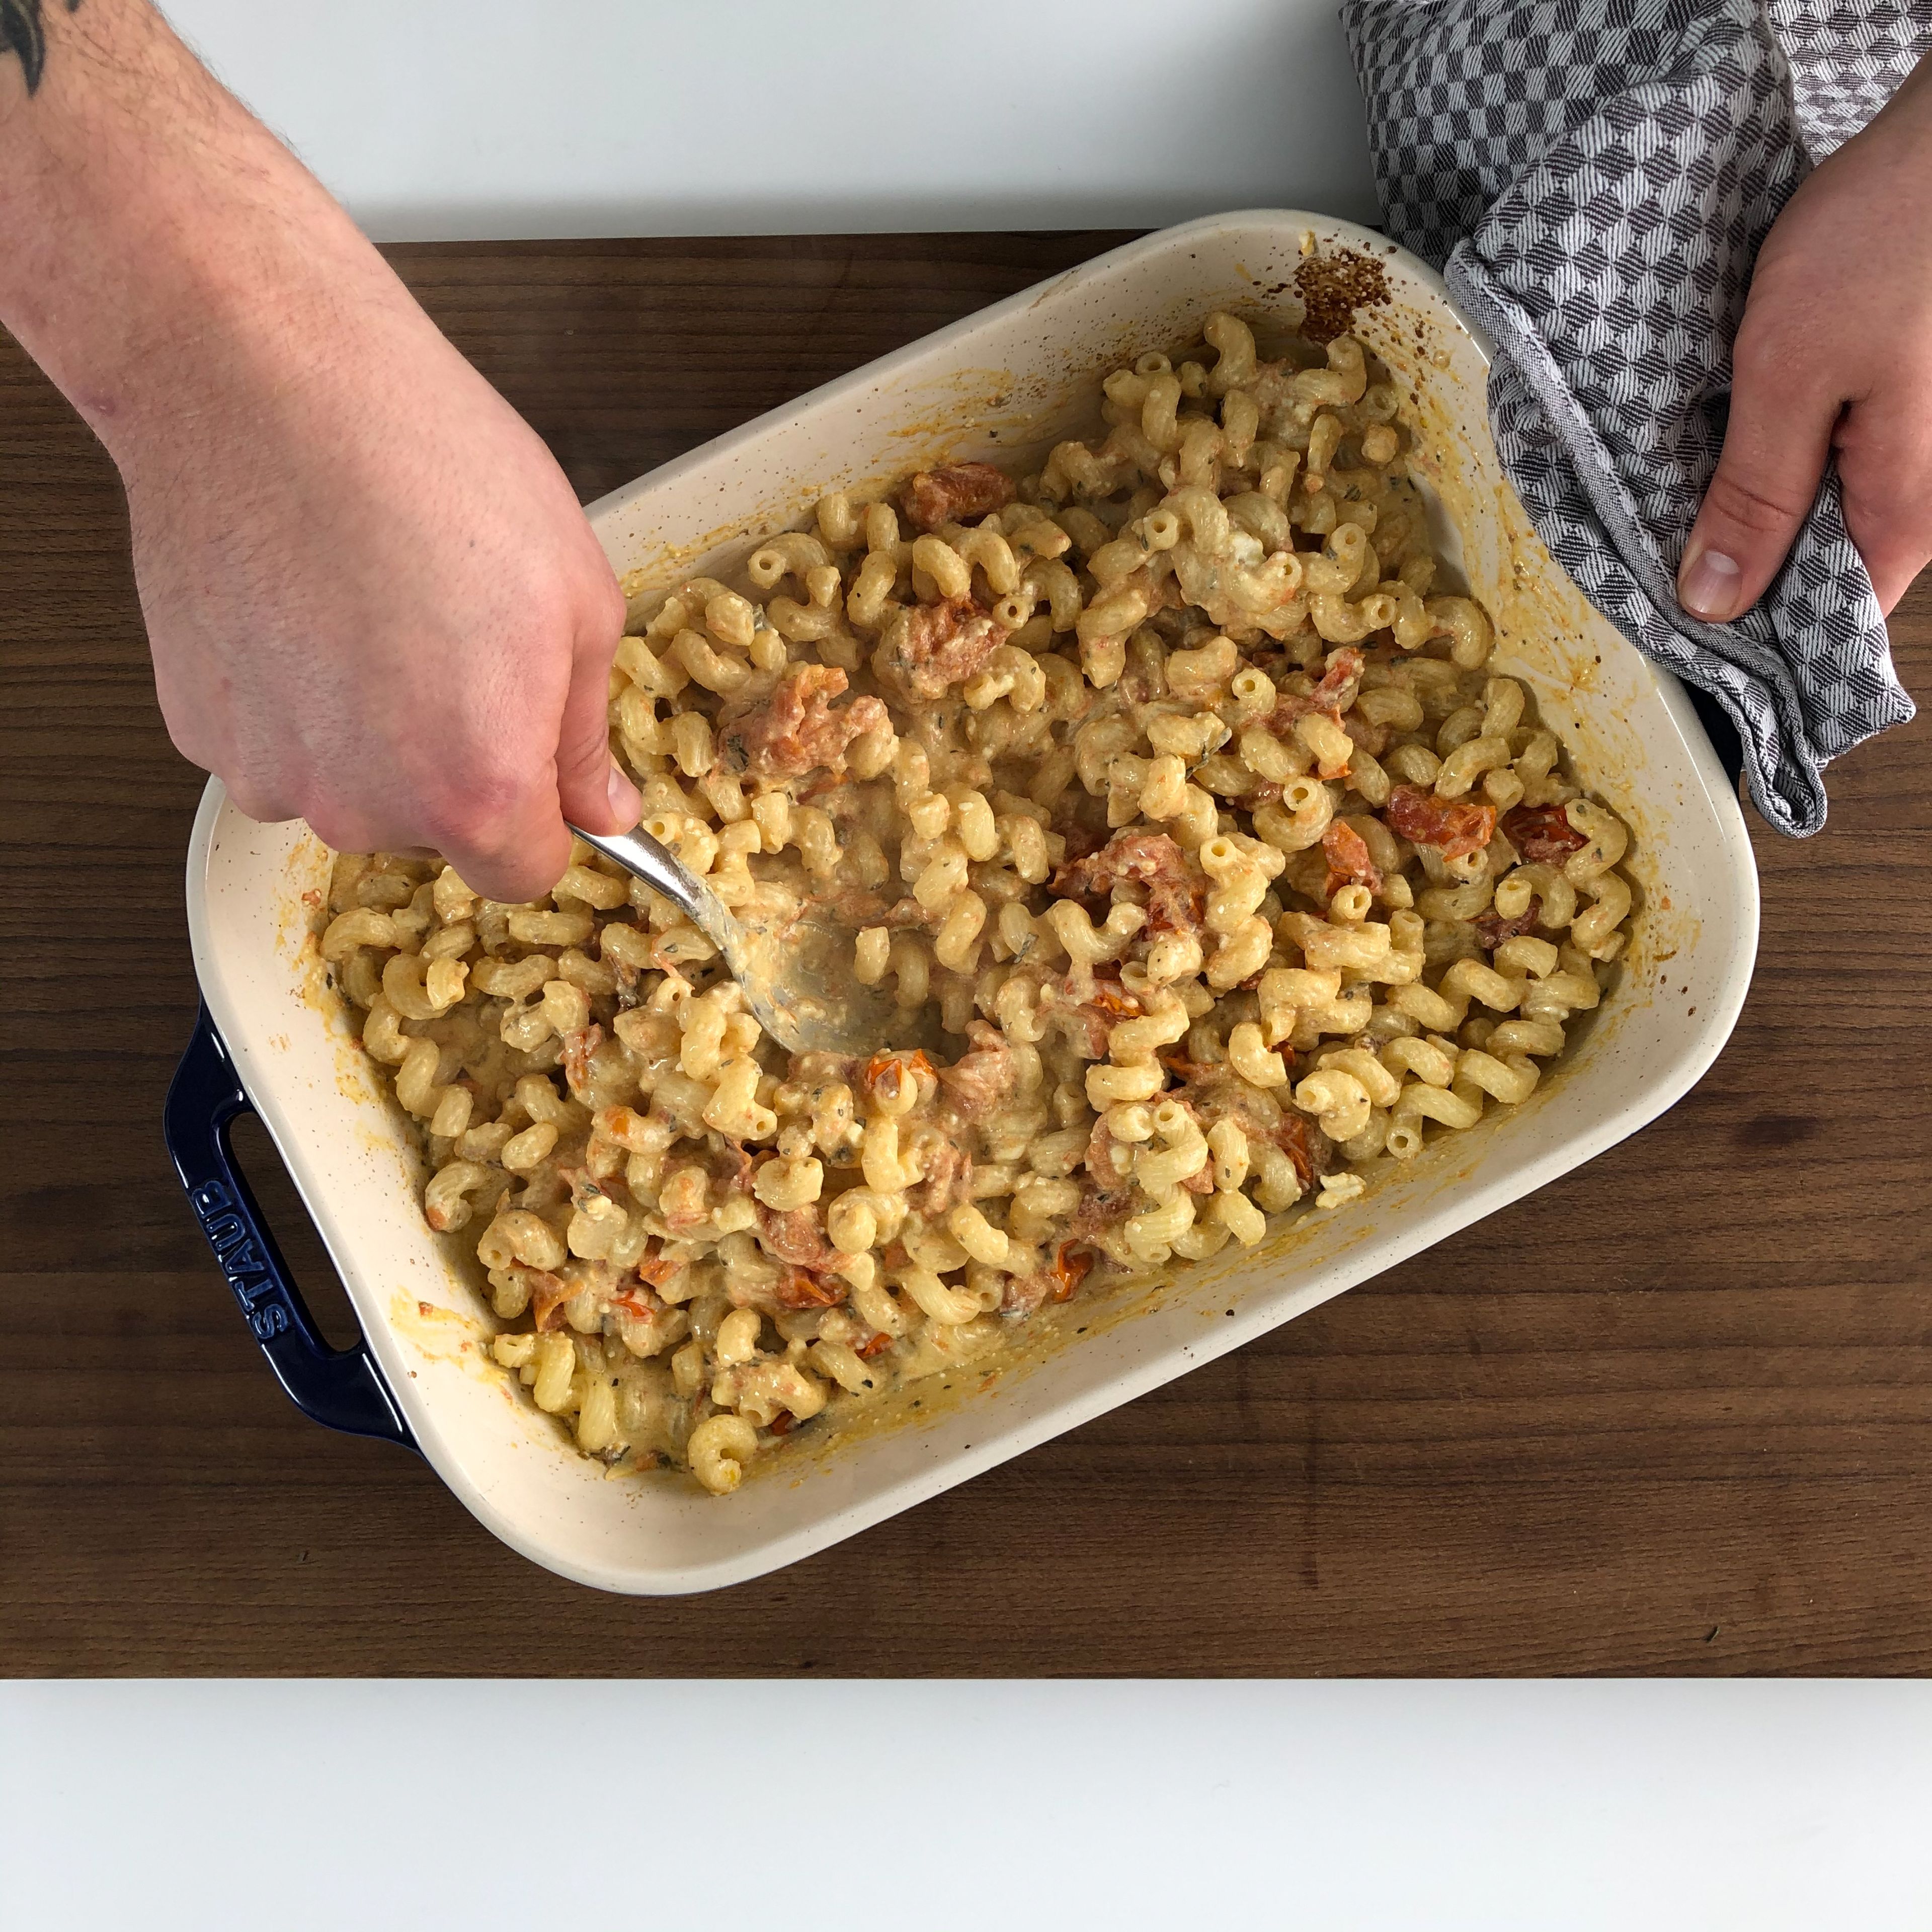 Remove baking dish from the oven and stir to combine all the ingredients. Stir in pasta and serve immediately. Enjoy!